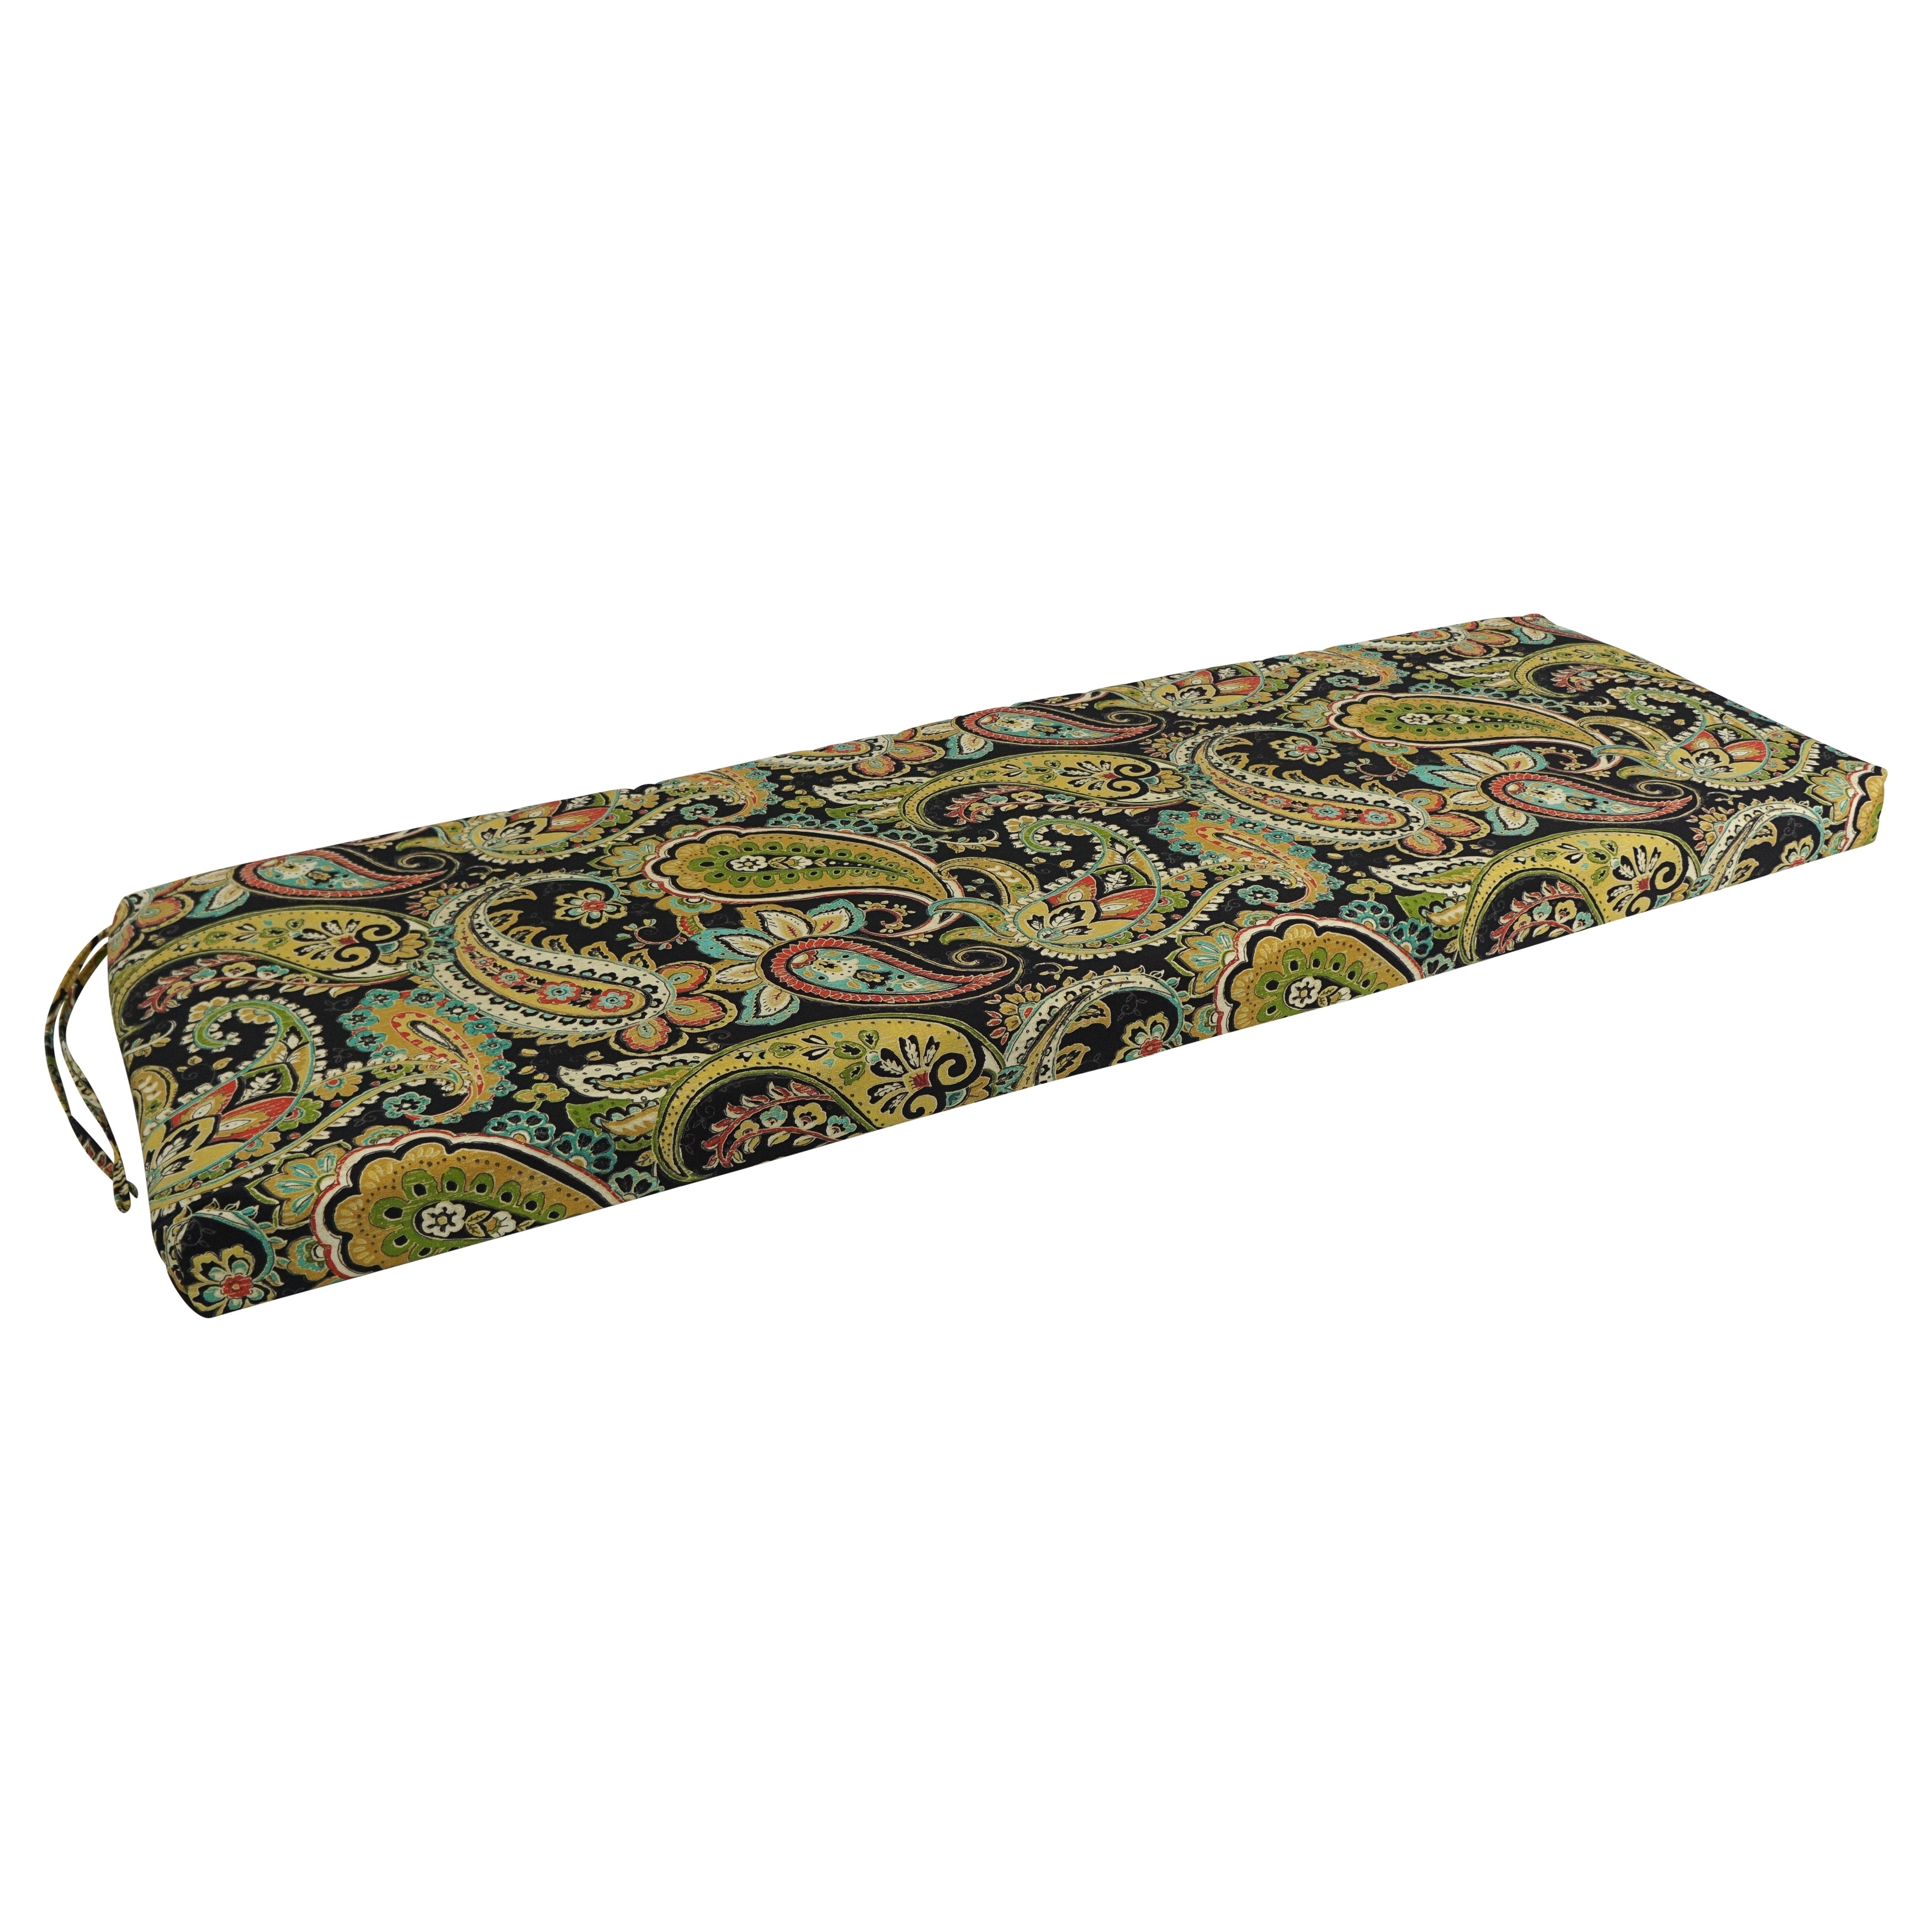 Blazing Needles 60-inch All-weather Outdoor Bench Cushion - On